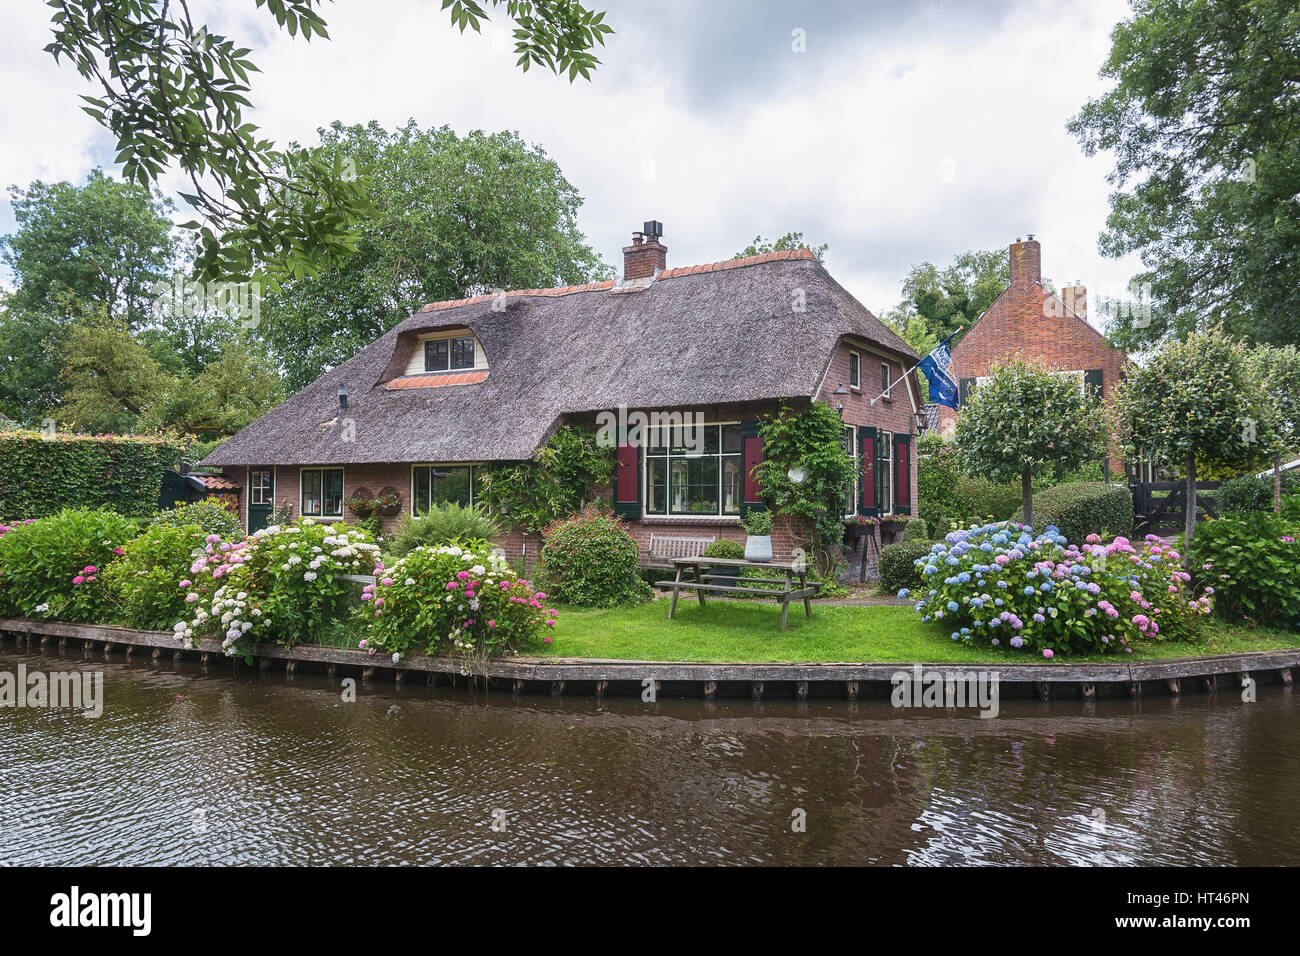 Giethoorn, Netherlands - June 29, 2016: View of a blooming garden in front of the house of the Dutch town. Stock Photo